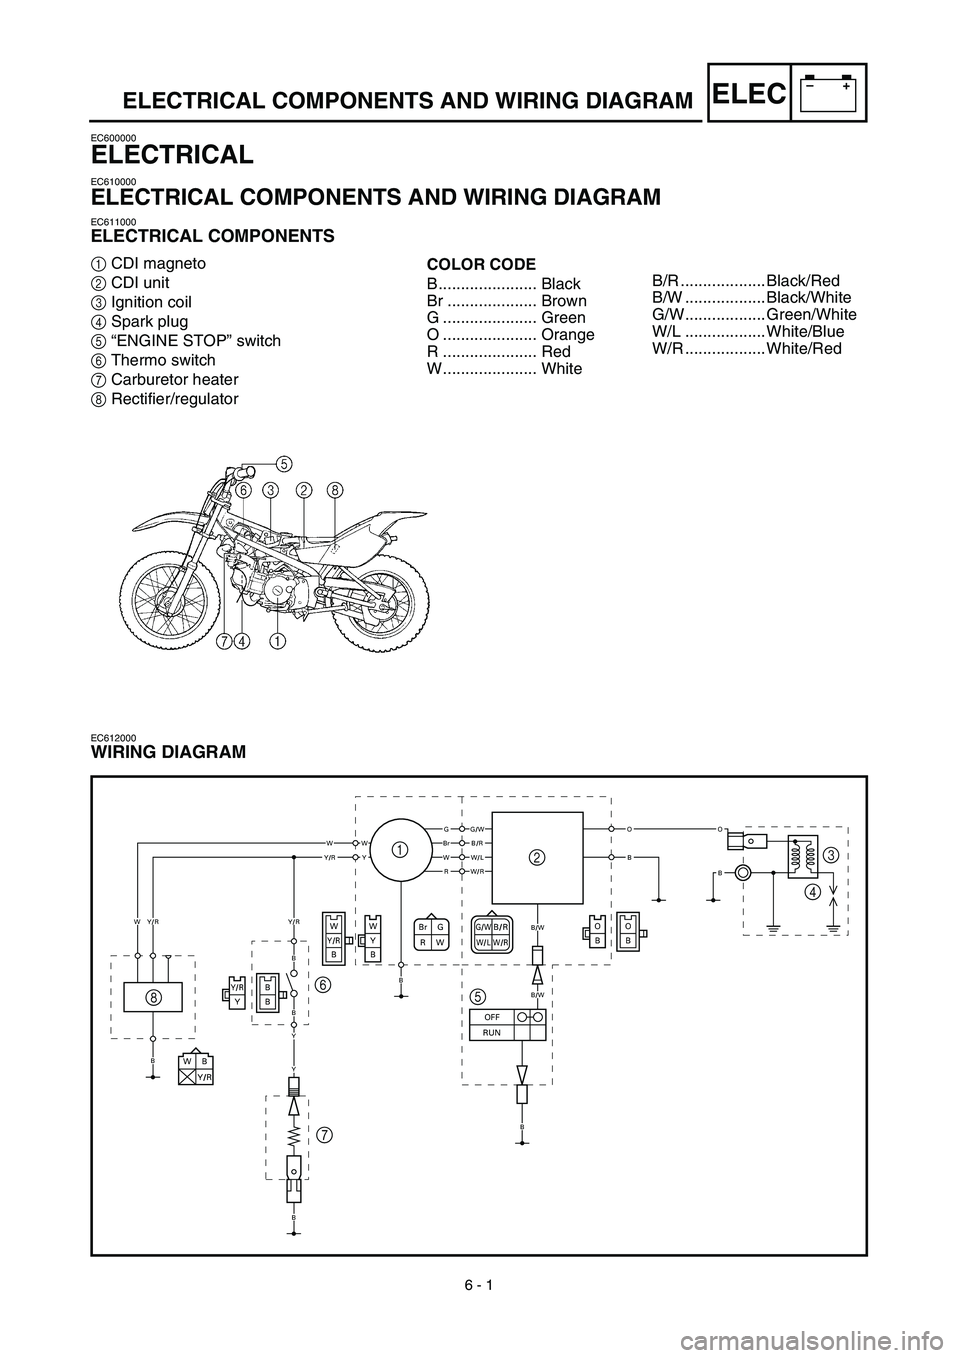 YAMAHA TTR90 2003  Notices Demploi (in French) 6 - 1
–+ELECELECTRICAL COMPONENTS AND WIRING DIAGRAM
EC600000
ELECTRICAL
EC610000
ELECTRICAL COMPONENTS AND WIRING DIAGRAM
EC611000
ELECTRICAL COMPONENTS
1CDI magneto
2CDI unit
3Ignition coil
4Spark